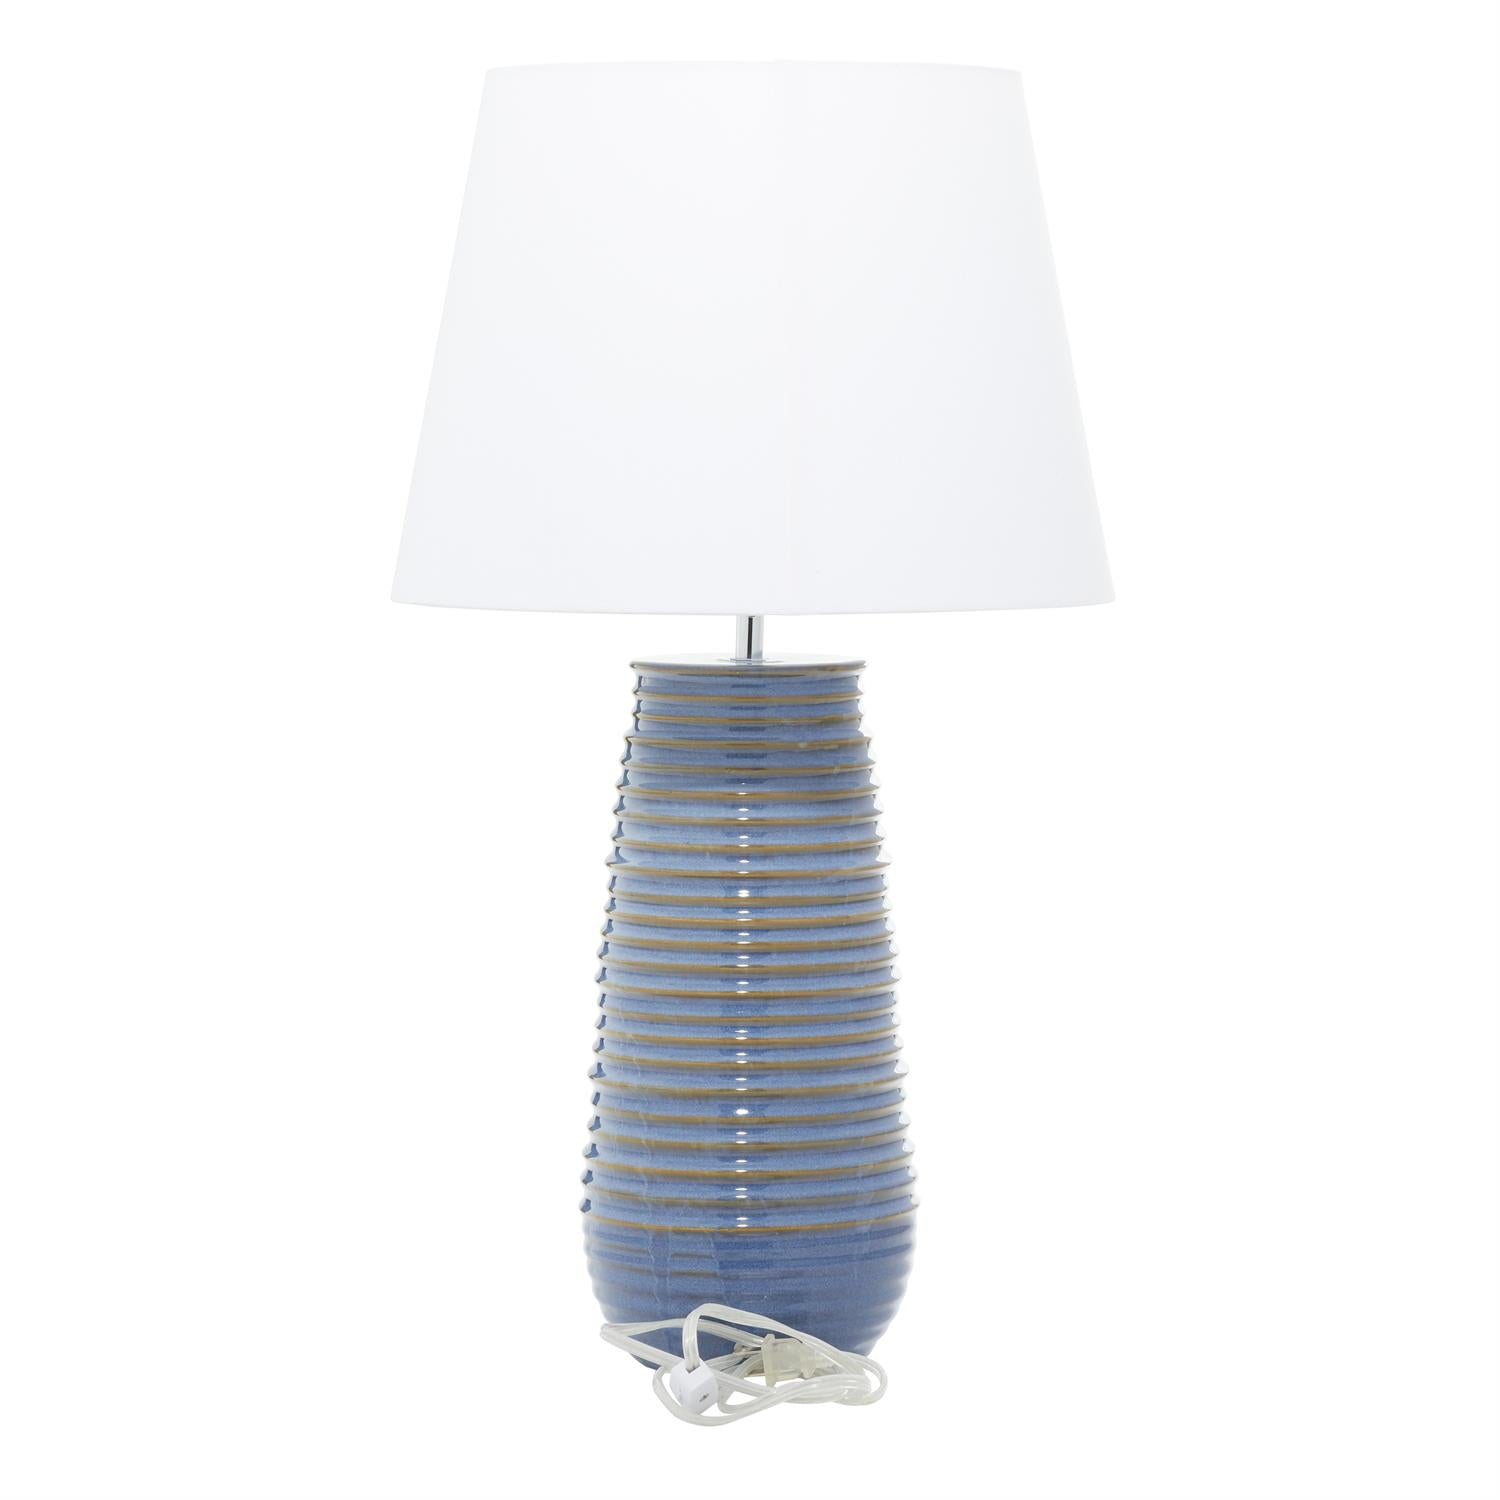 Blue Ceramic Table Lamp with Drum Shade 15" x 15" x 28"